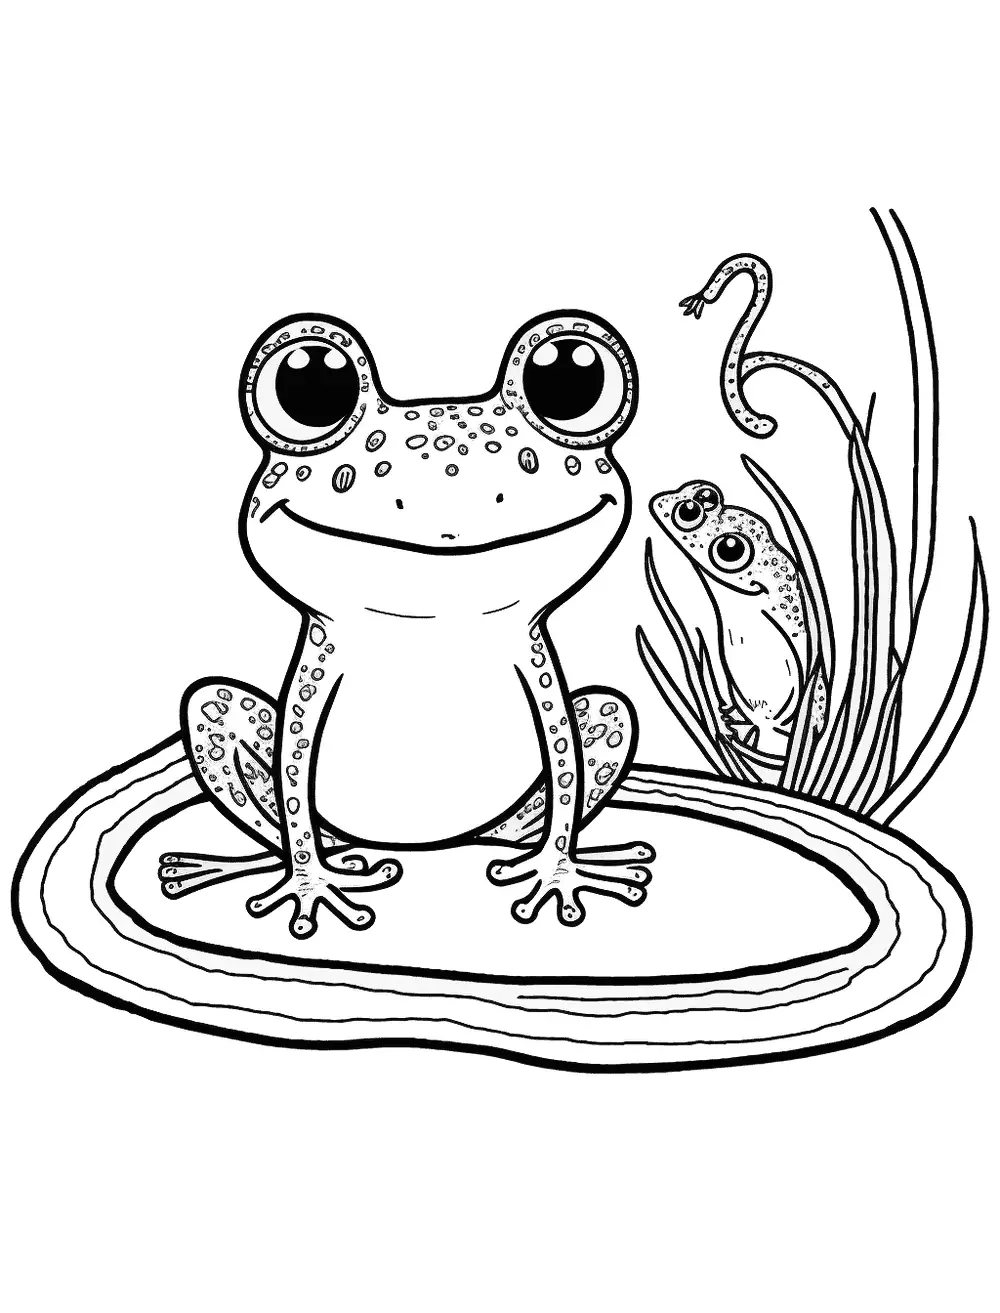 Frog and Snake Coloring Page - A frog and a snake, with a friendly interaction.